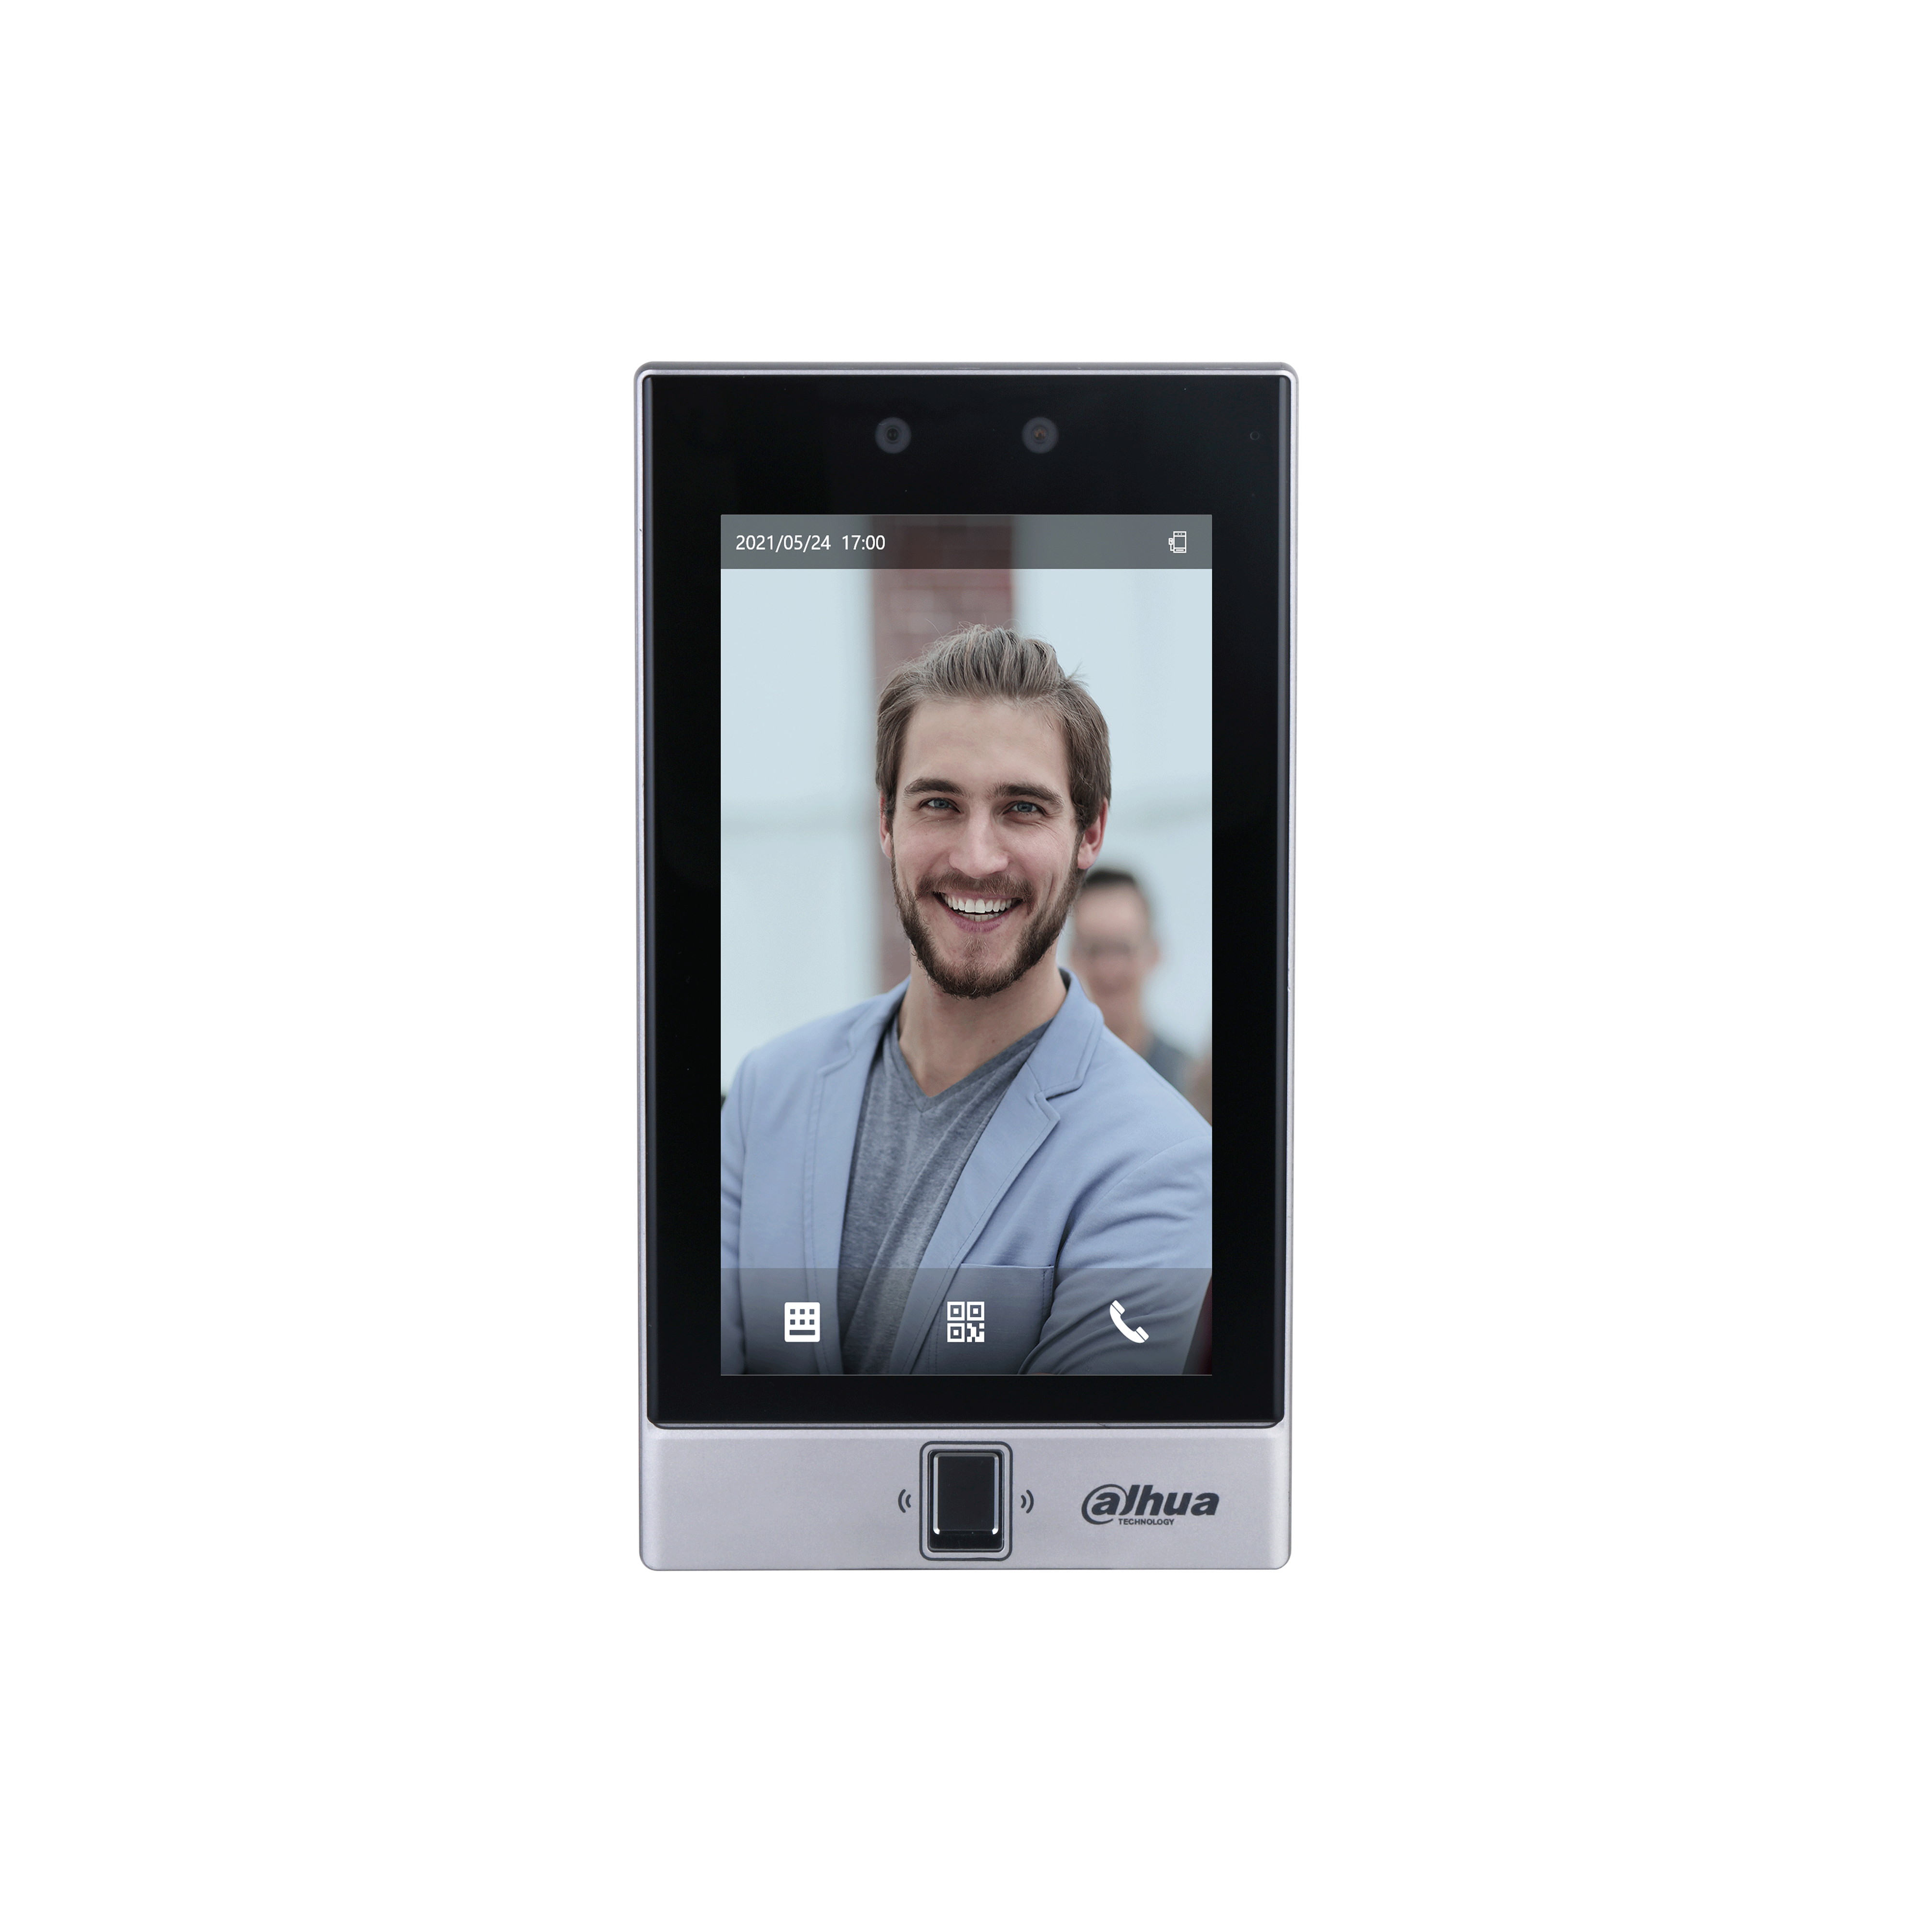 DHI-ASI7214S-W STANDALONE FACIAL RECOGNITION ACCESS CONTROL TERMINAL 7 INCH CAPACITIVE TOUCHSCREEN WITH 2MP DUAL LENS DWDR TEMPERED GLASS SILVER/BLACK 1 x RS485/RS232 1 x WIEGAND INPUT / OUTPUT WIRELESS